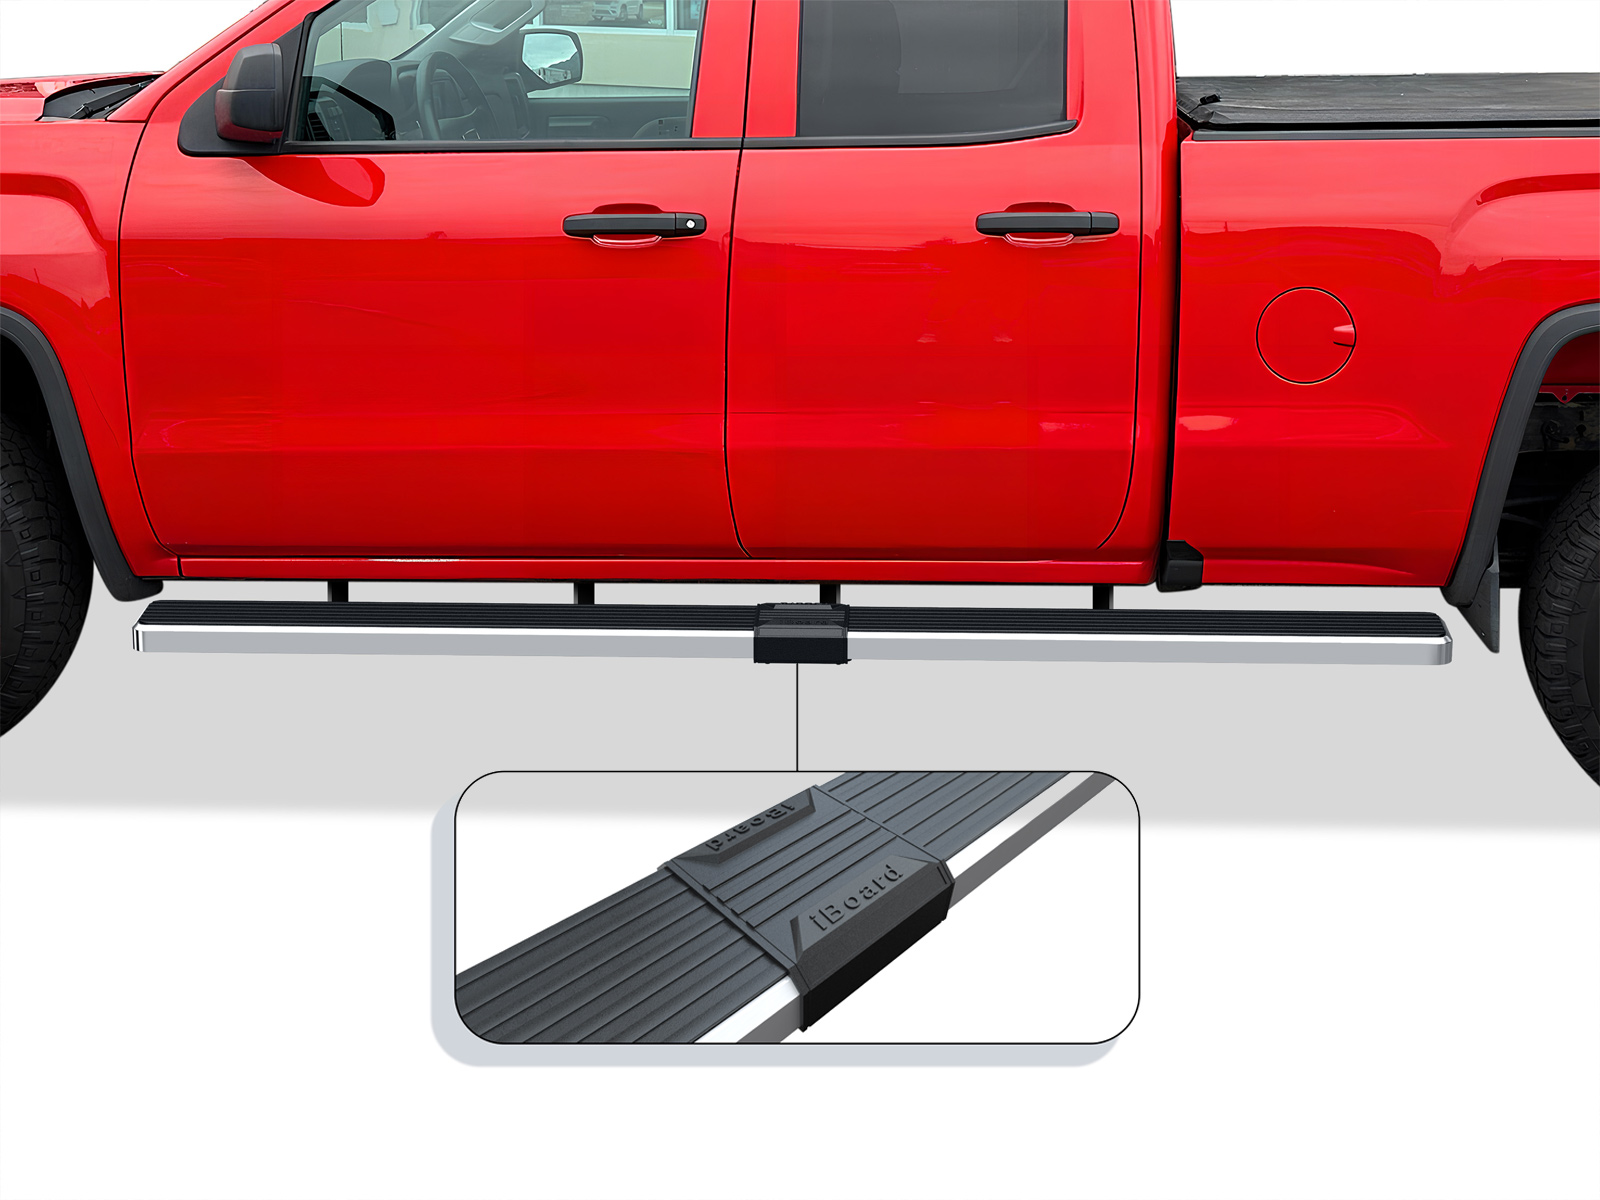 2007-2018 Chevy/GMC Silverado/Sierra 1500 Extended Cab/Double Cab 6.5 ft Bed (Incl. 2019 Silverado 1500 LD & 2019 Sierra 1500 Limited) 2007-2019 Chevy/GMC Silverado/Sierra 2500 HD/3500 HD Extended Cab/Double Cab 6.5ft Bed (Incl. Diesel models with DEF tan